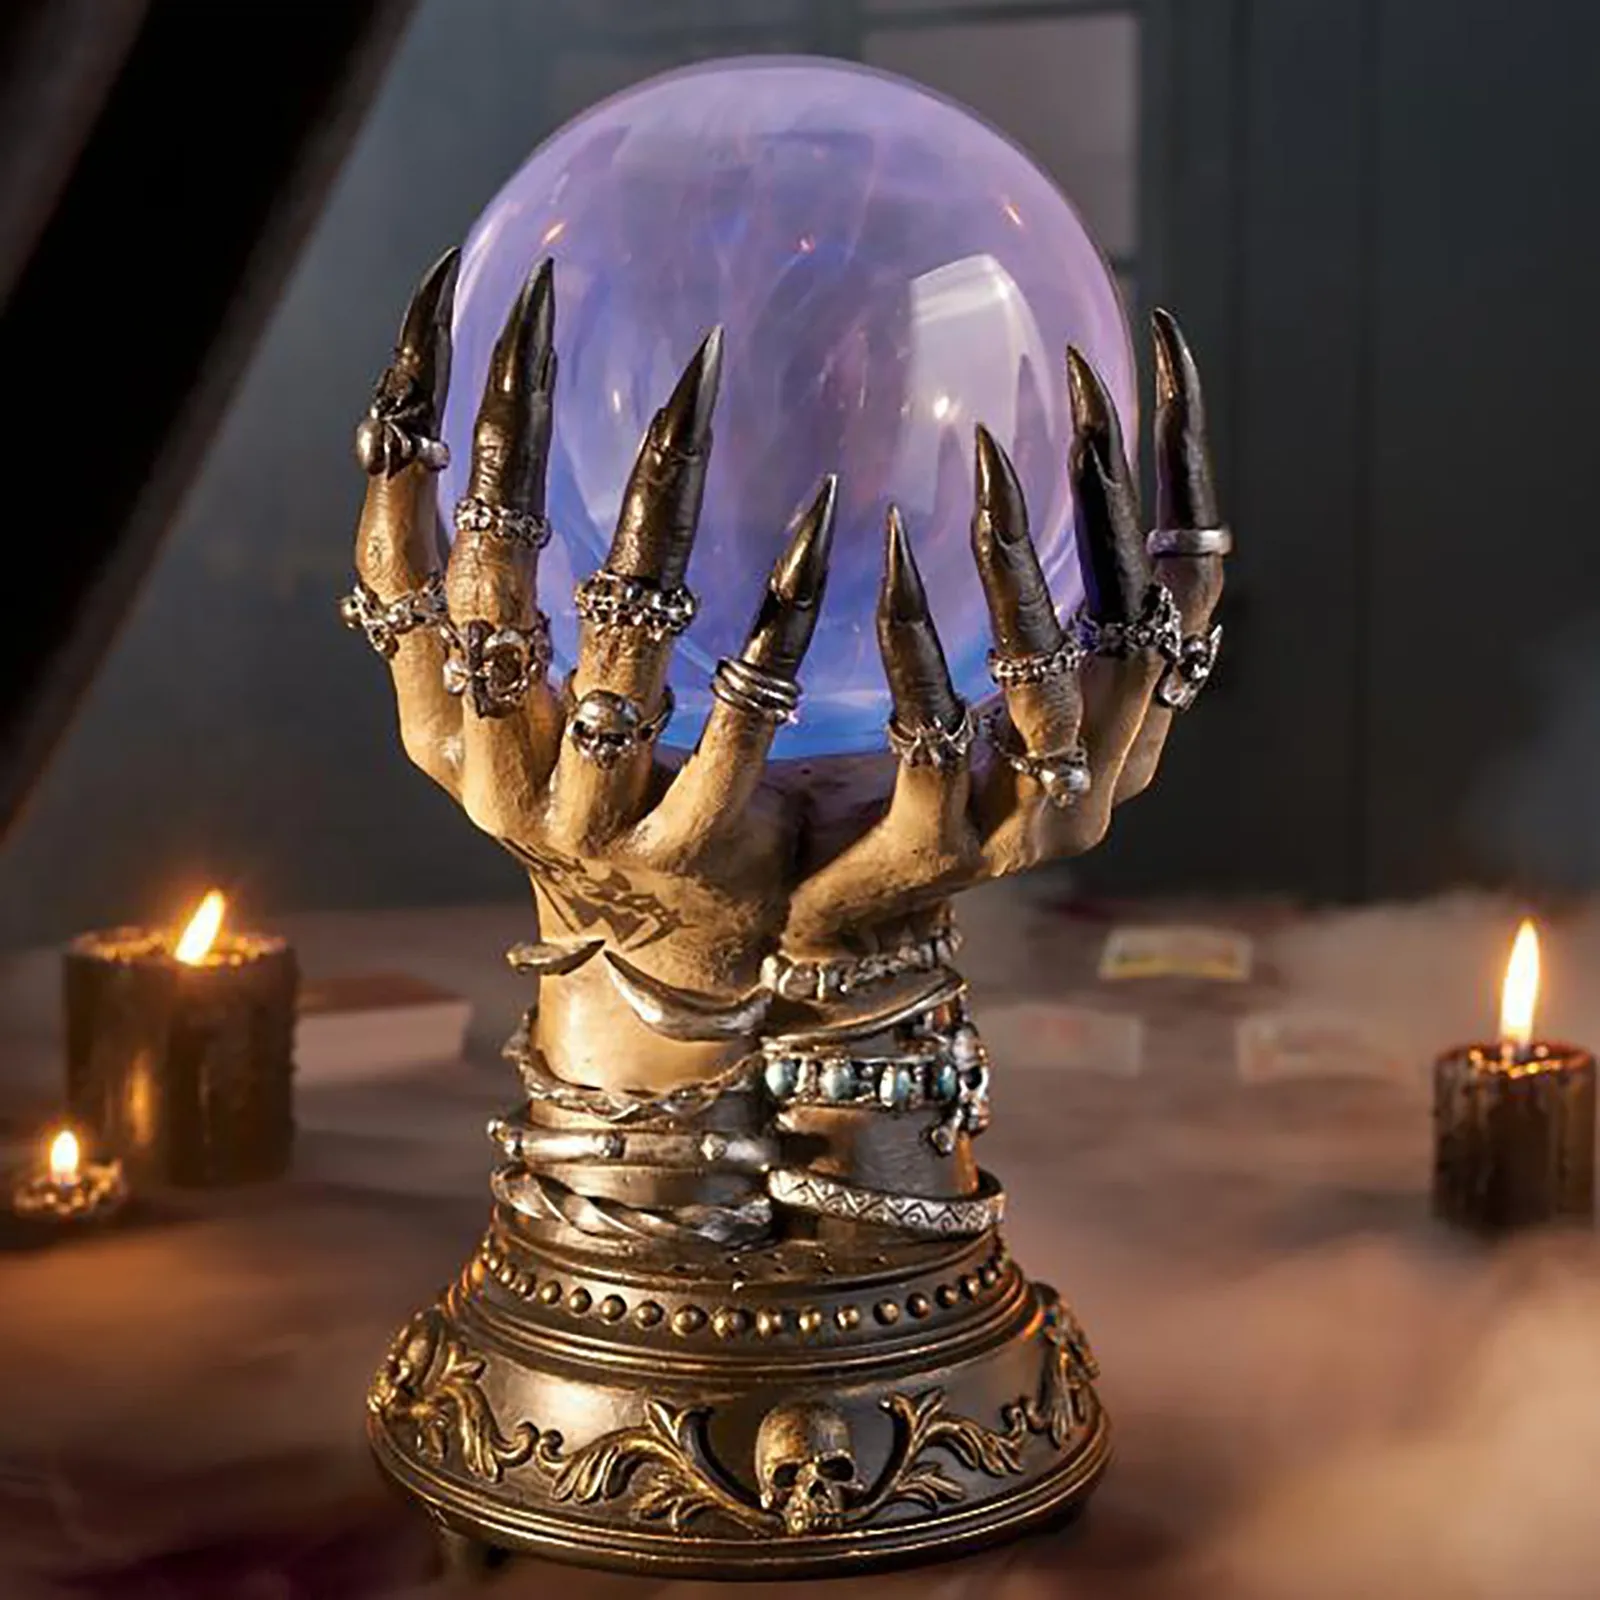 Glowing Deluxe Cellular Crystal Ball Luminous Magic Witch Hand Electrostatic Plasma Light Serve Skull Finger Hallow Spooky Decor